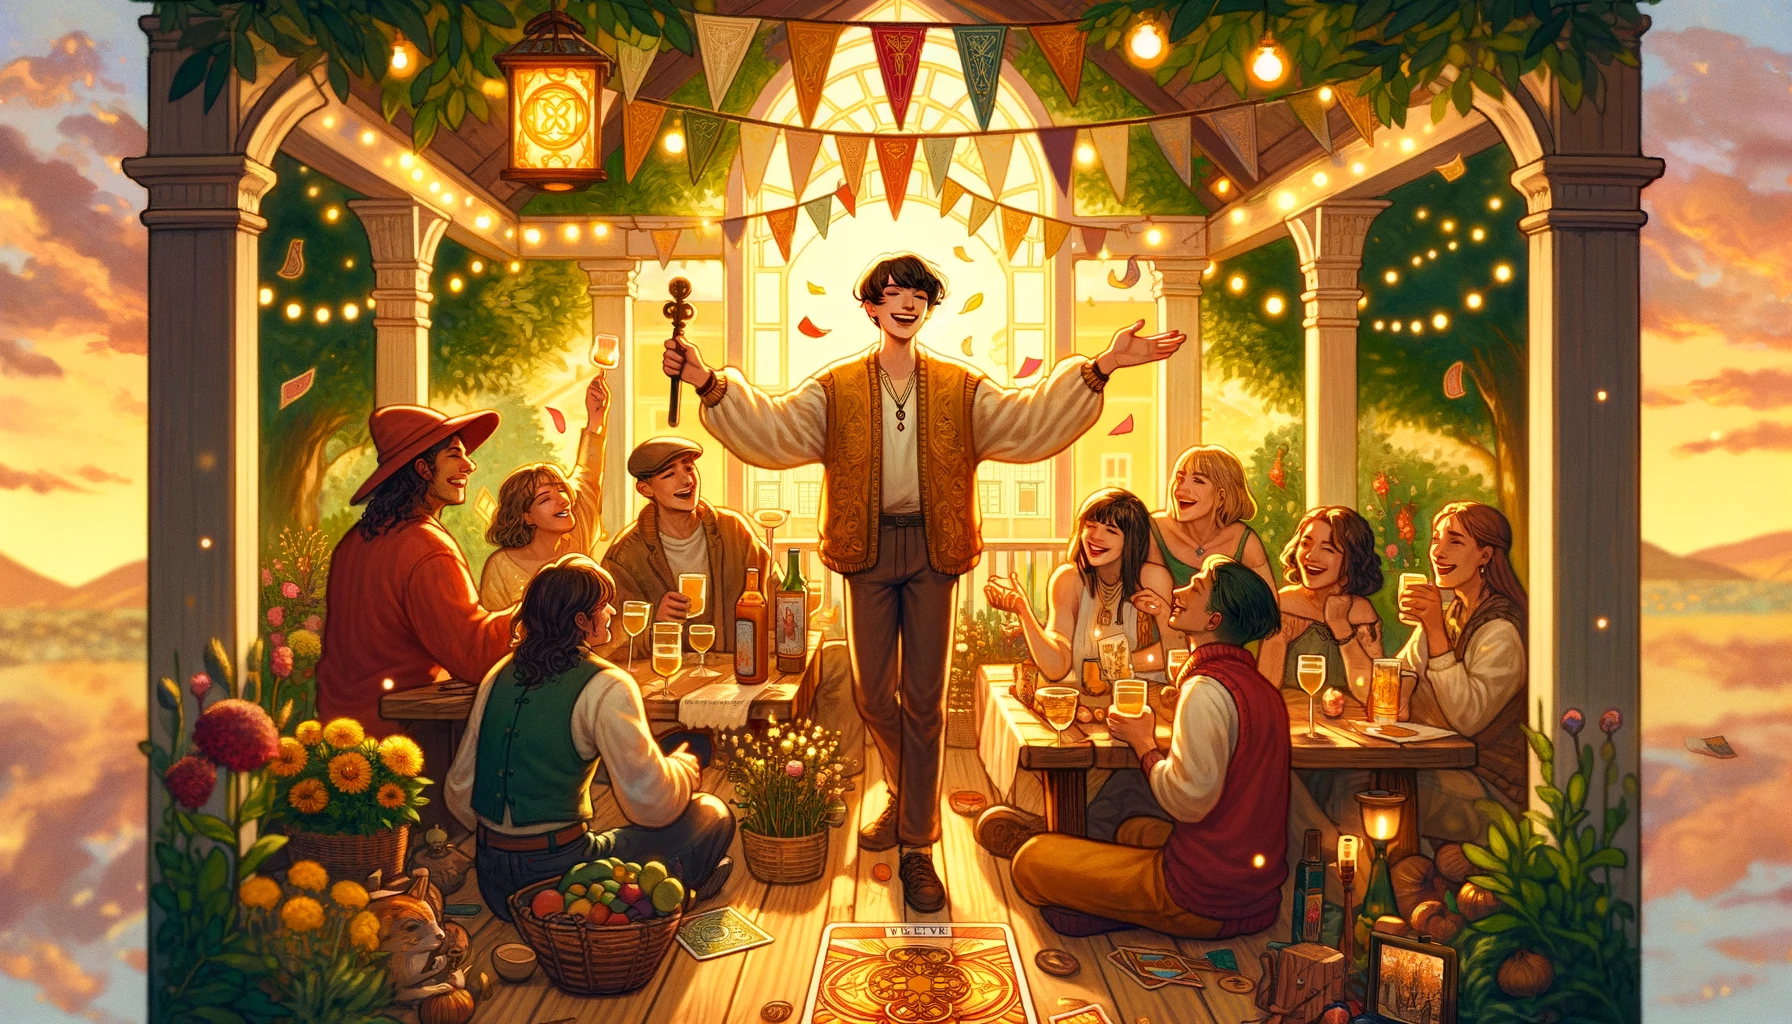 The image features a person surrounded by a jubilant community, radiating joy and celebration as they bask in the glow of their accomplishments. This visual captures the sense of belonging and positive energy associated with the card, emphasizing their influence in fostering a nurturing and celebratory atmosphere within the community.